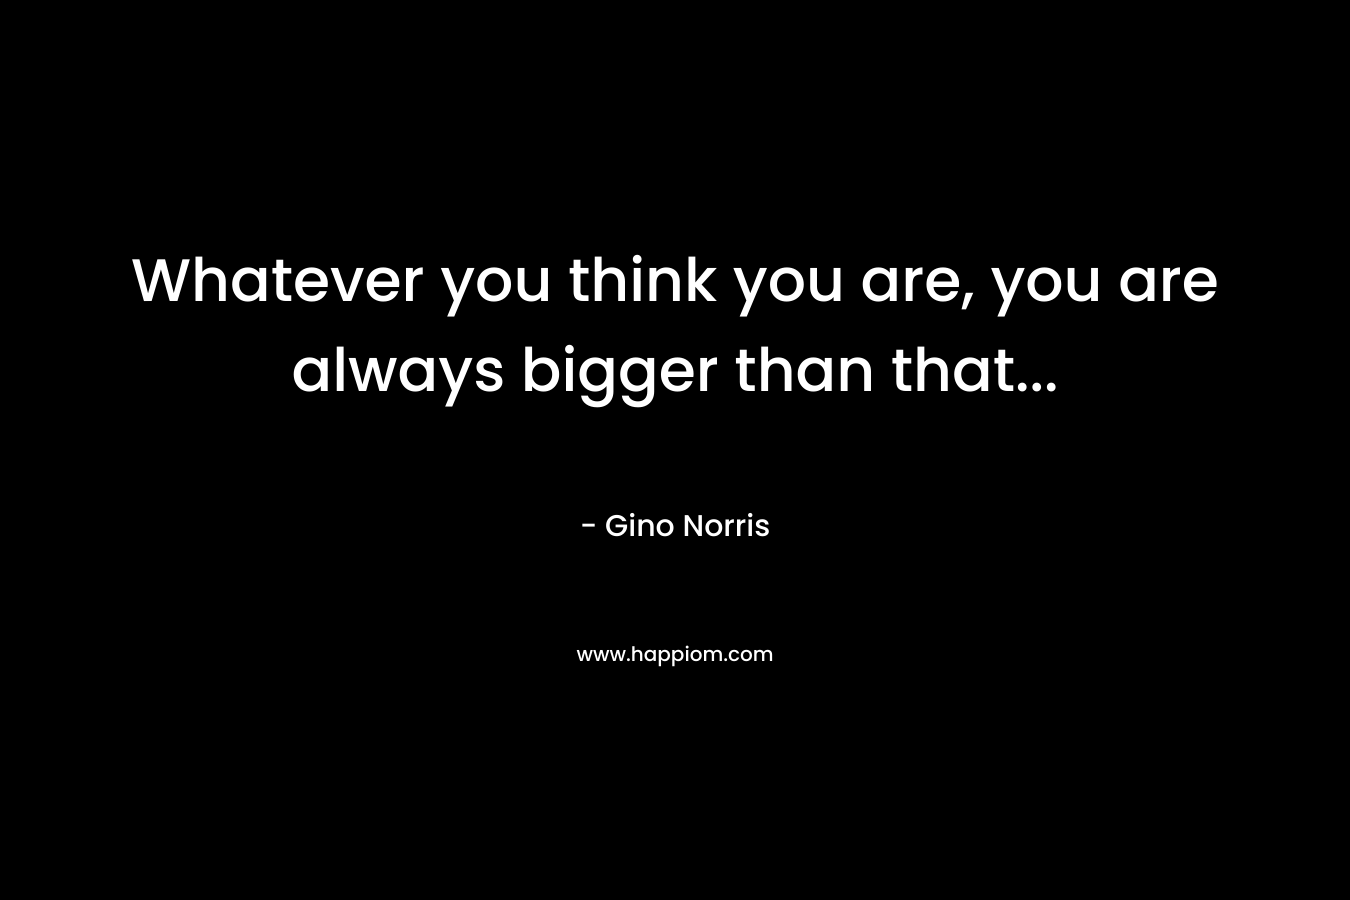 Whatever you think you are, you are always bigger than that...